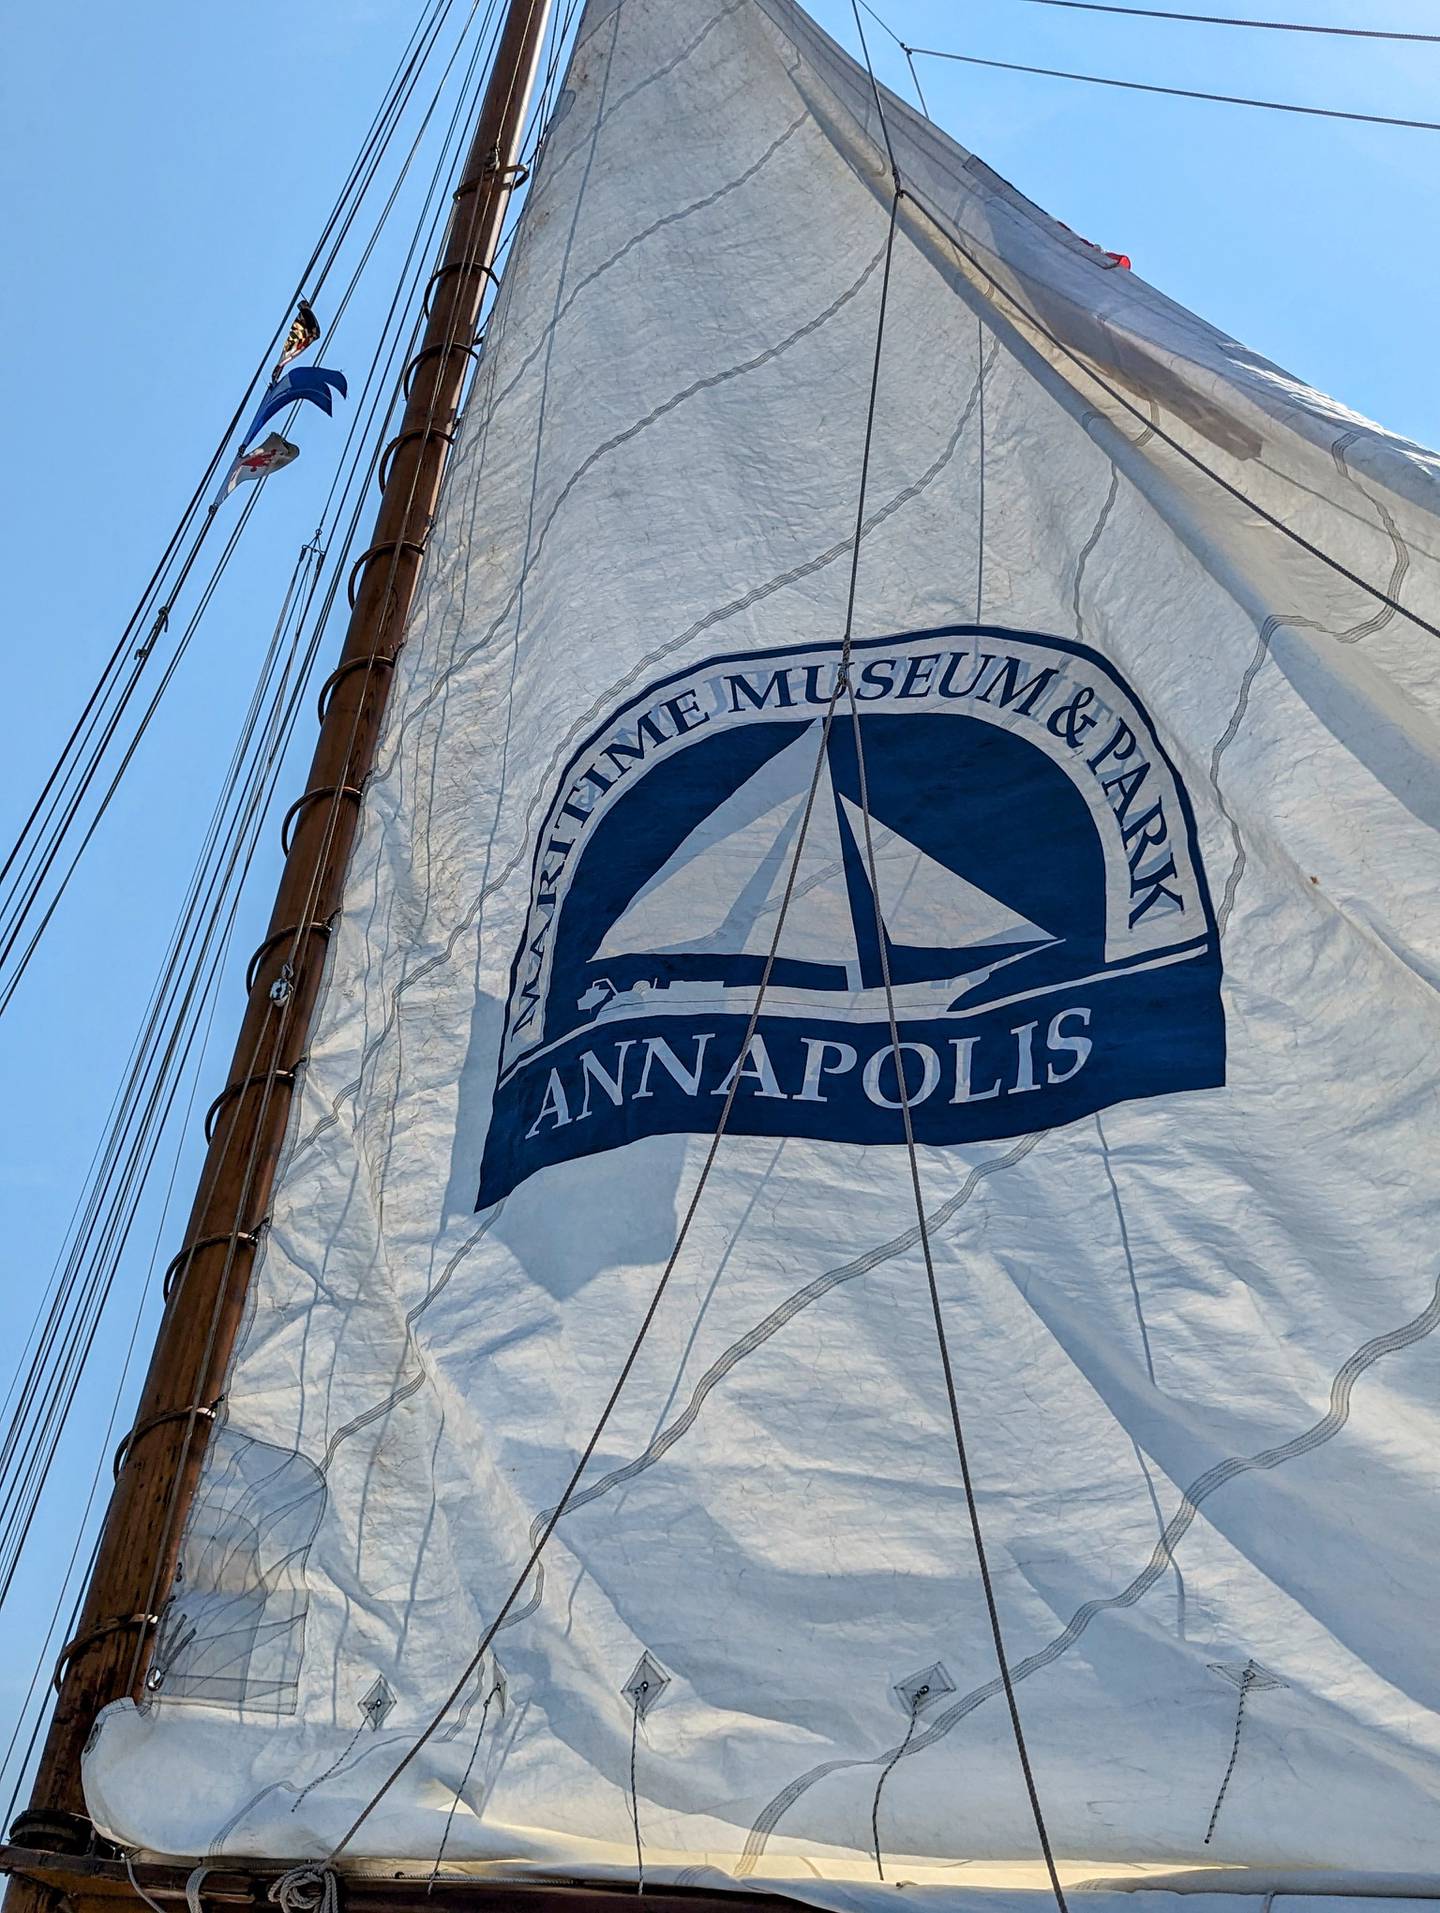 The Annapolis Maritime Museum & Park logo adorns the mainsail of the Wilma Lee, an 83-year-old skipjack.